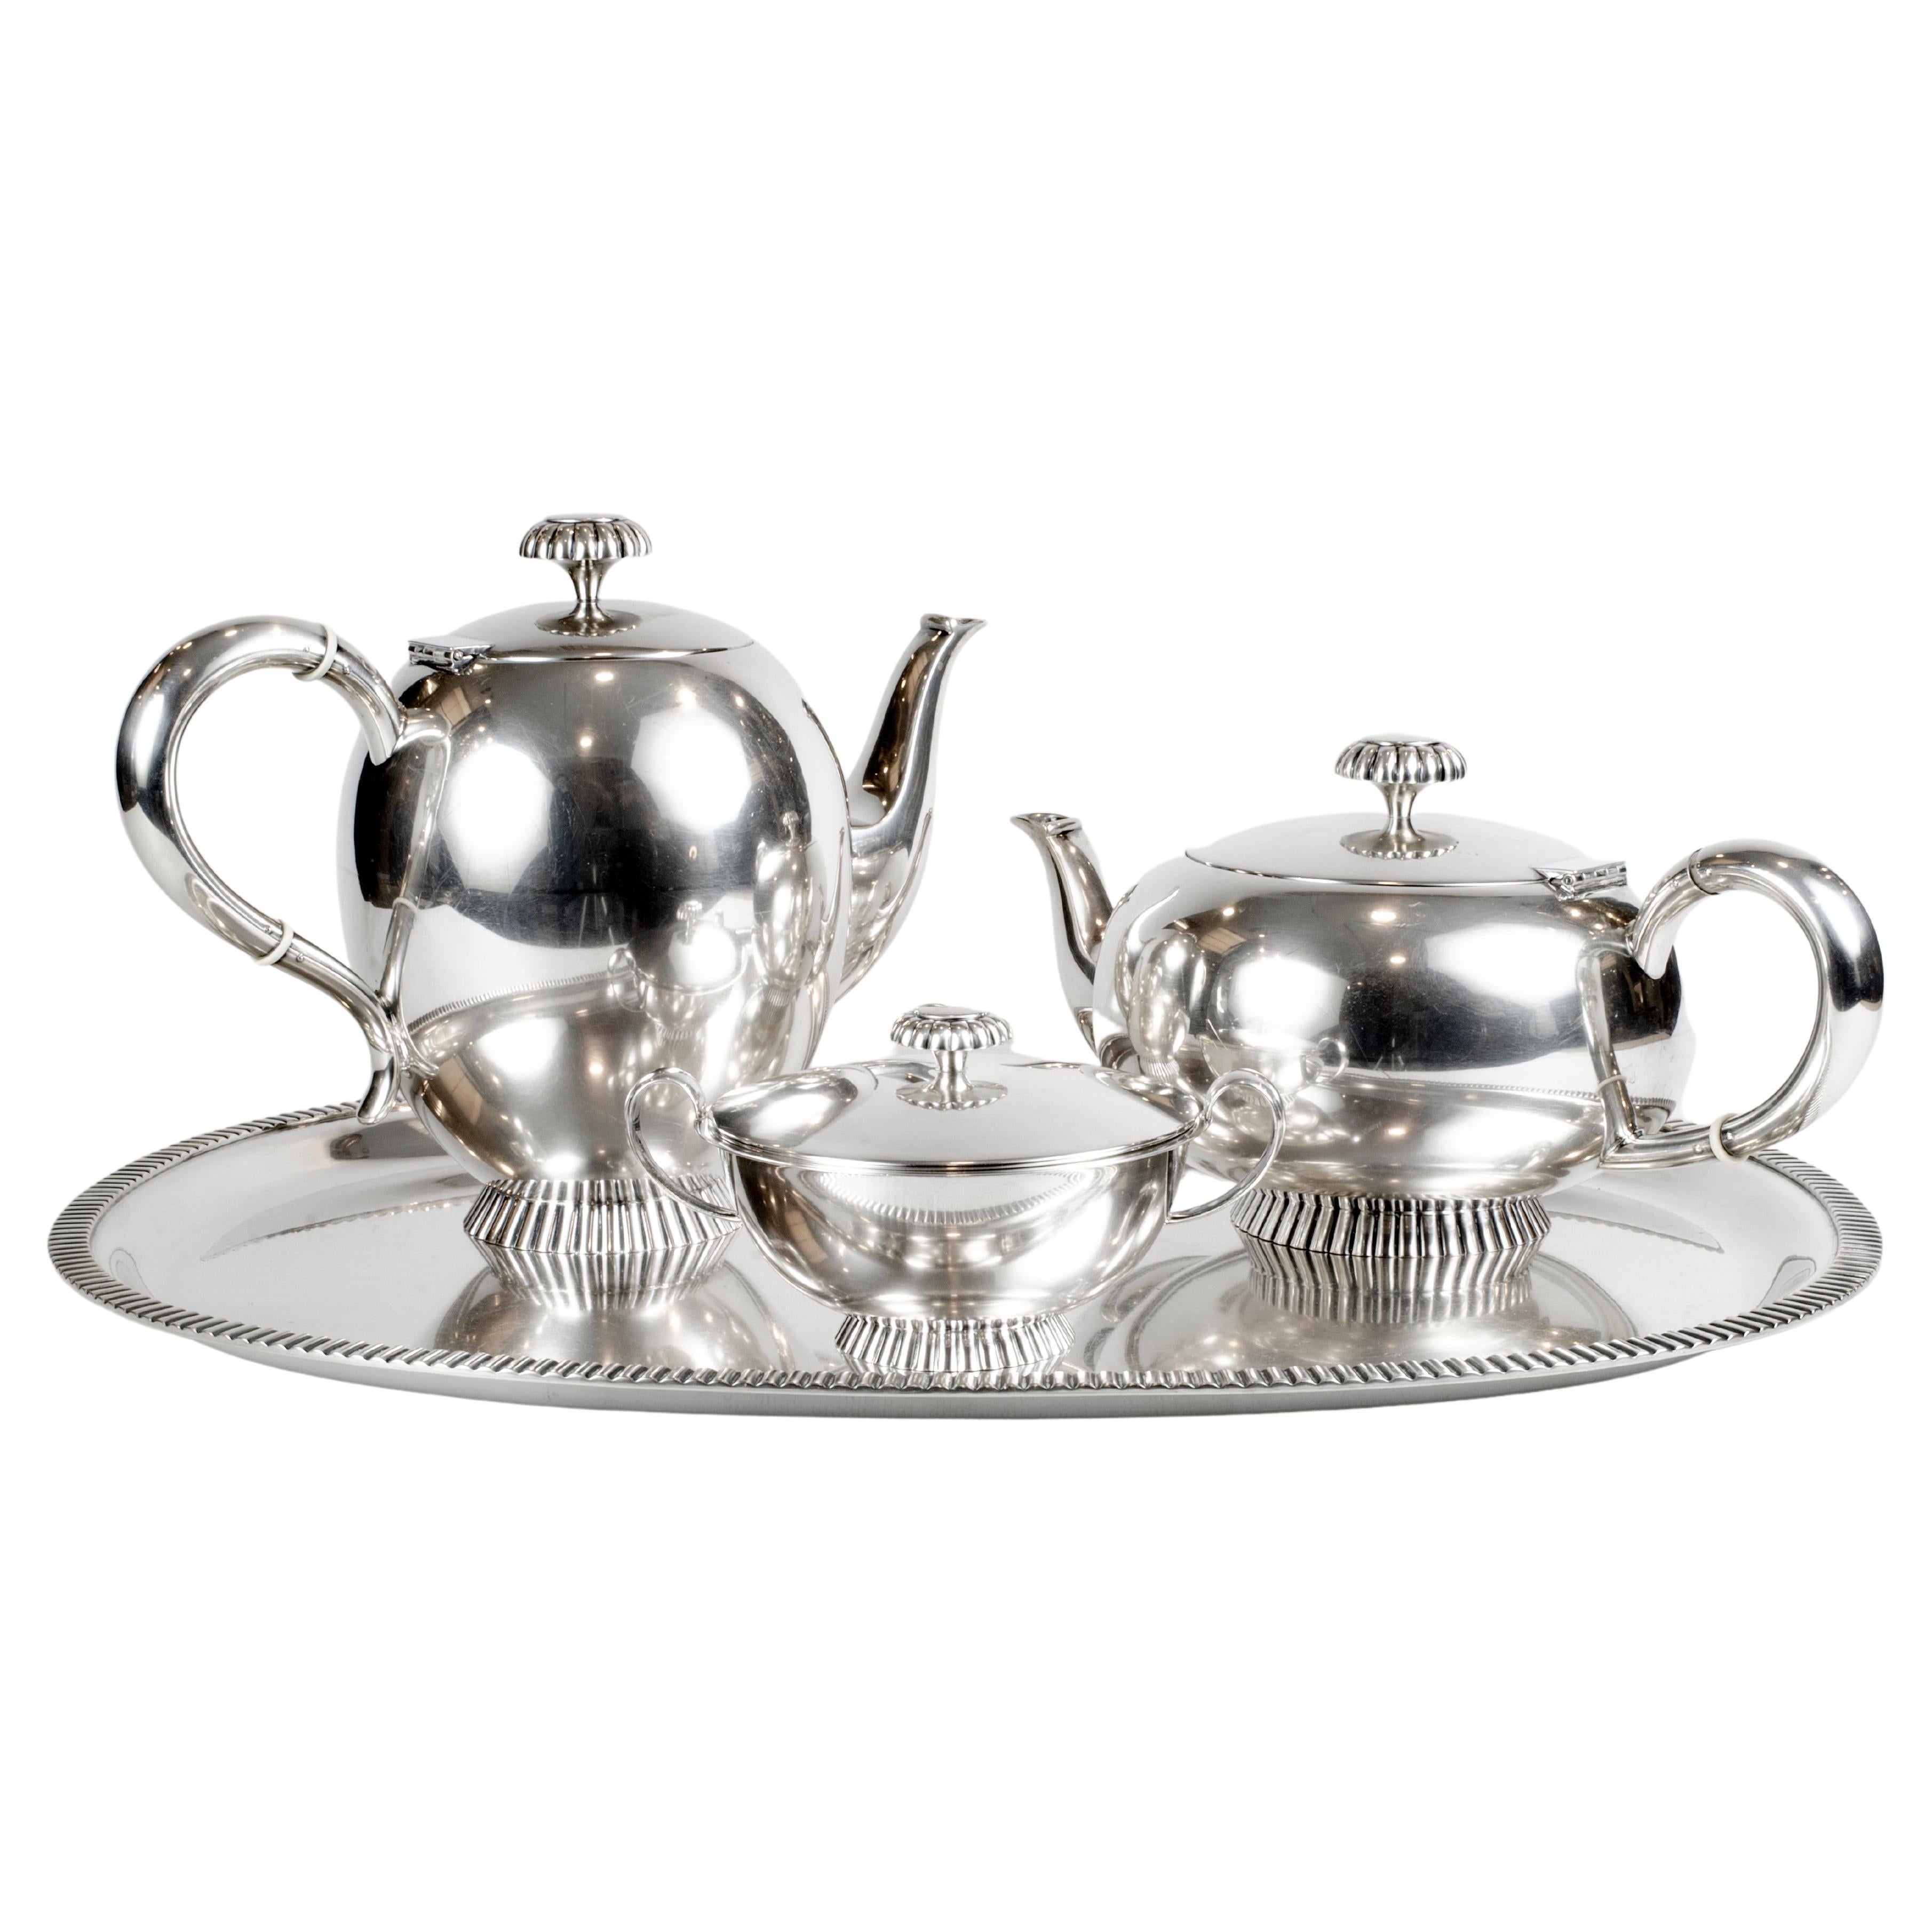 Wilkens silver art deco coffee and tea set For Sale